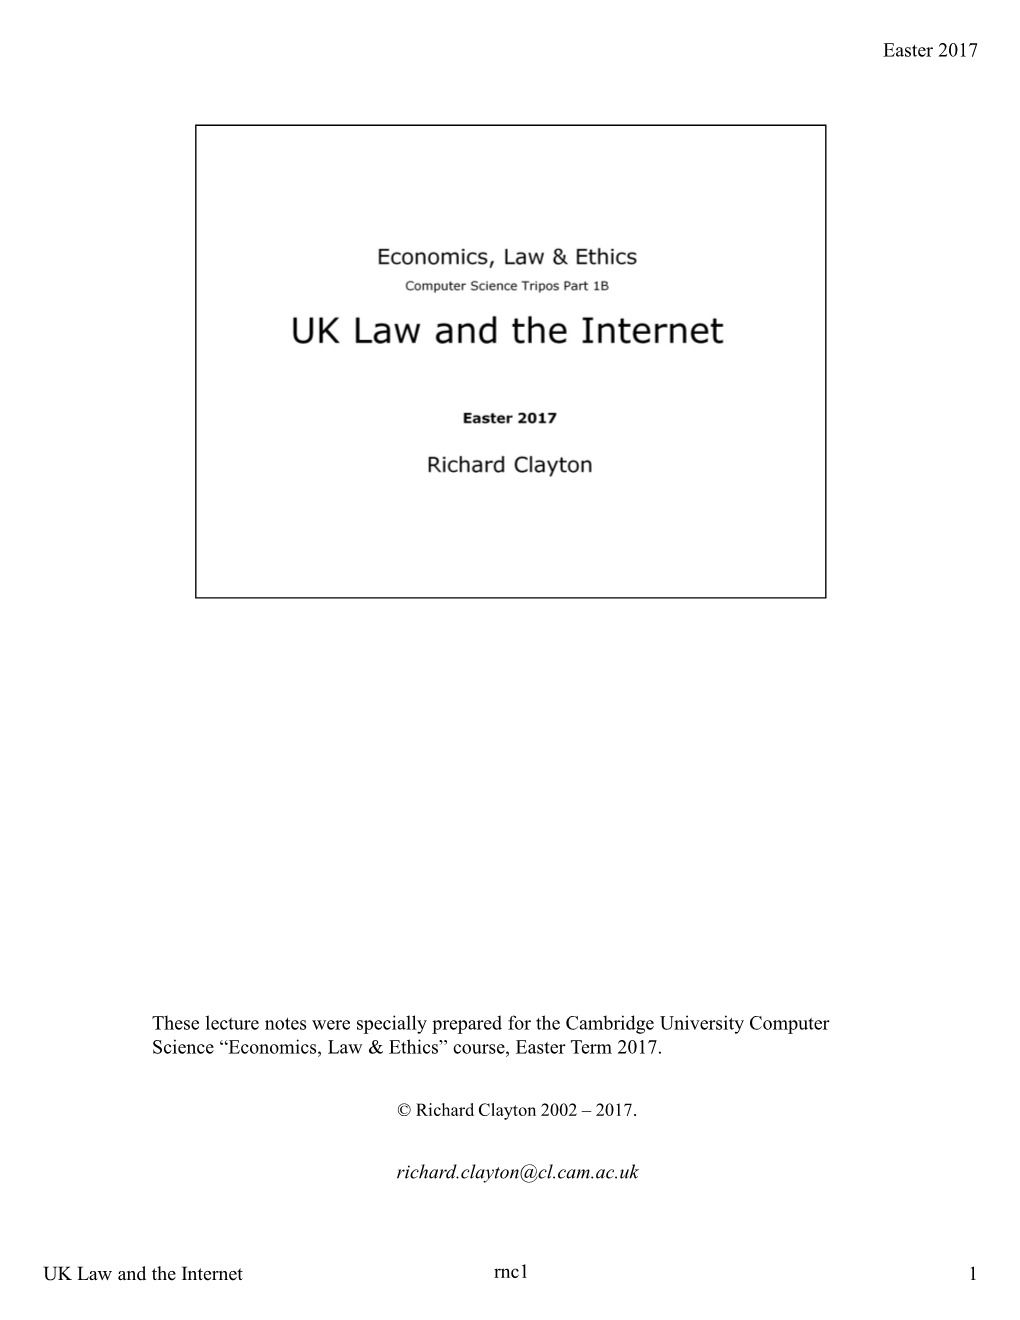 Rnc1 Easter 2017 UK Law and the Internet 1 These Lecture Notes Were